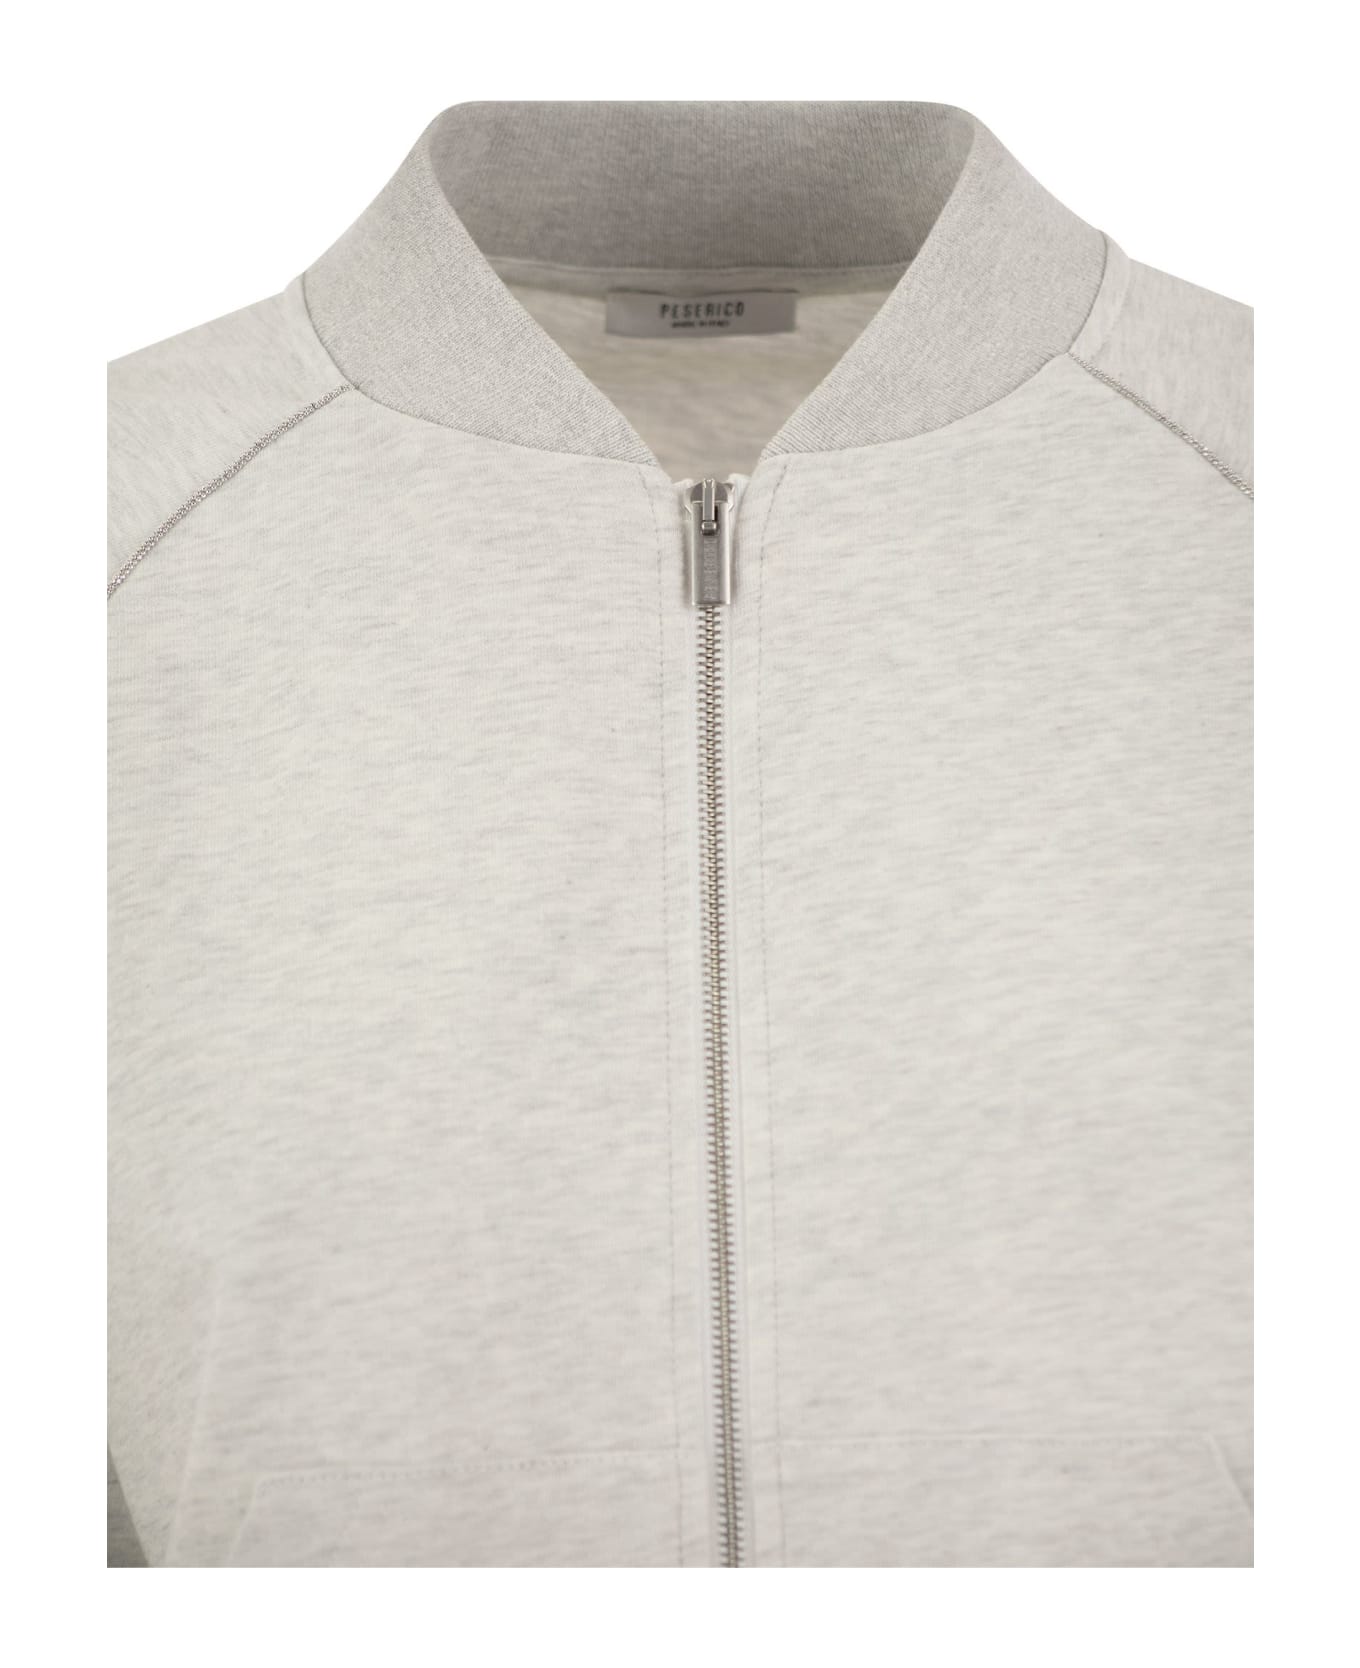 Peserico Sweatshirt In Cotton Mélange And Tricot Details - Grey